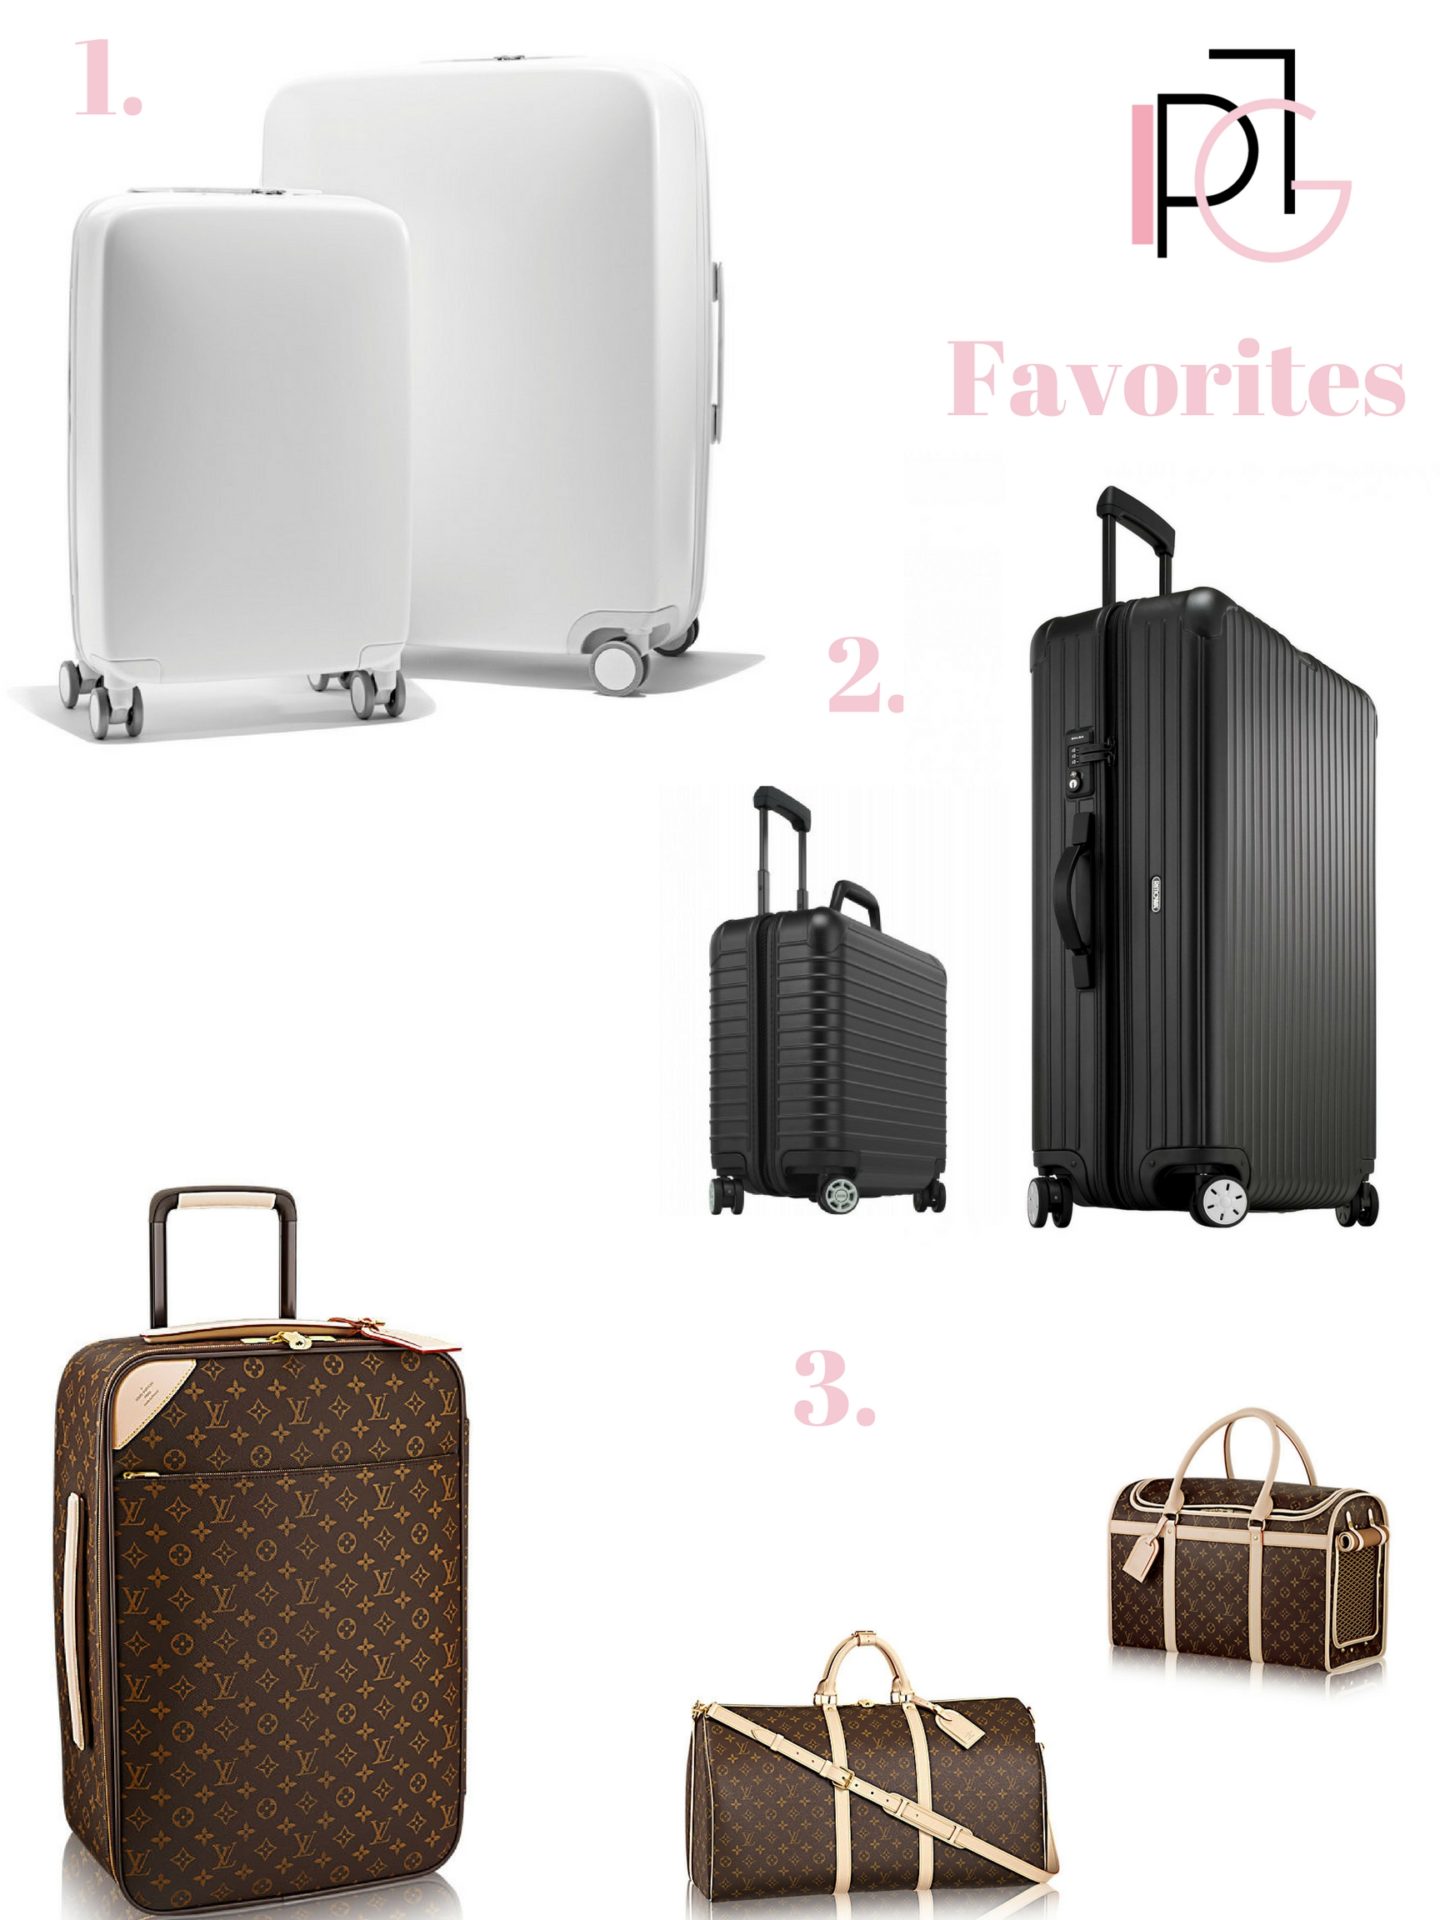 Carry-ons worth Carrying on